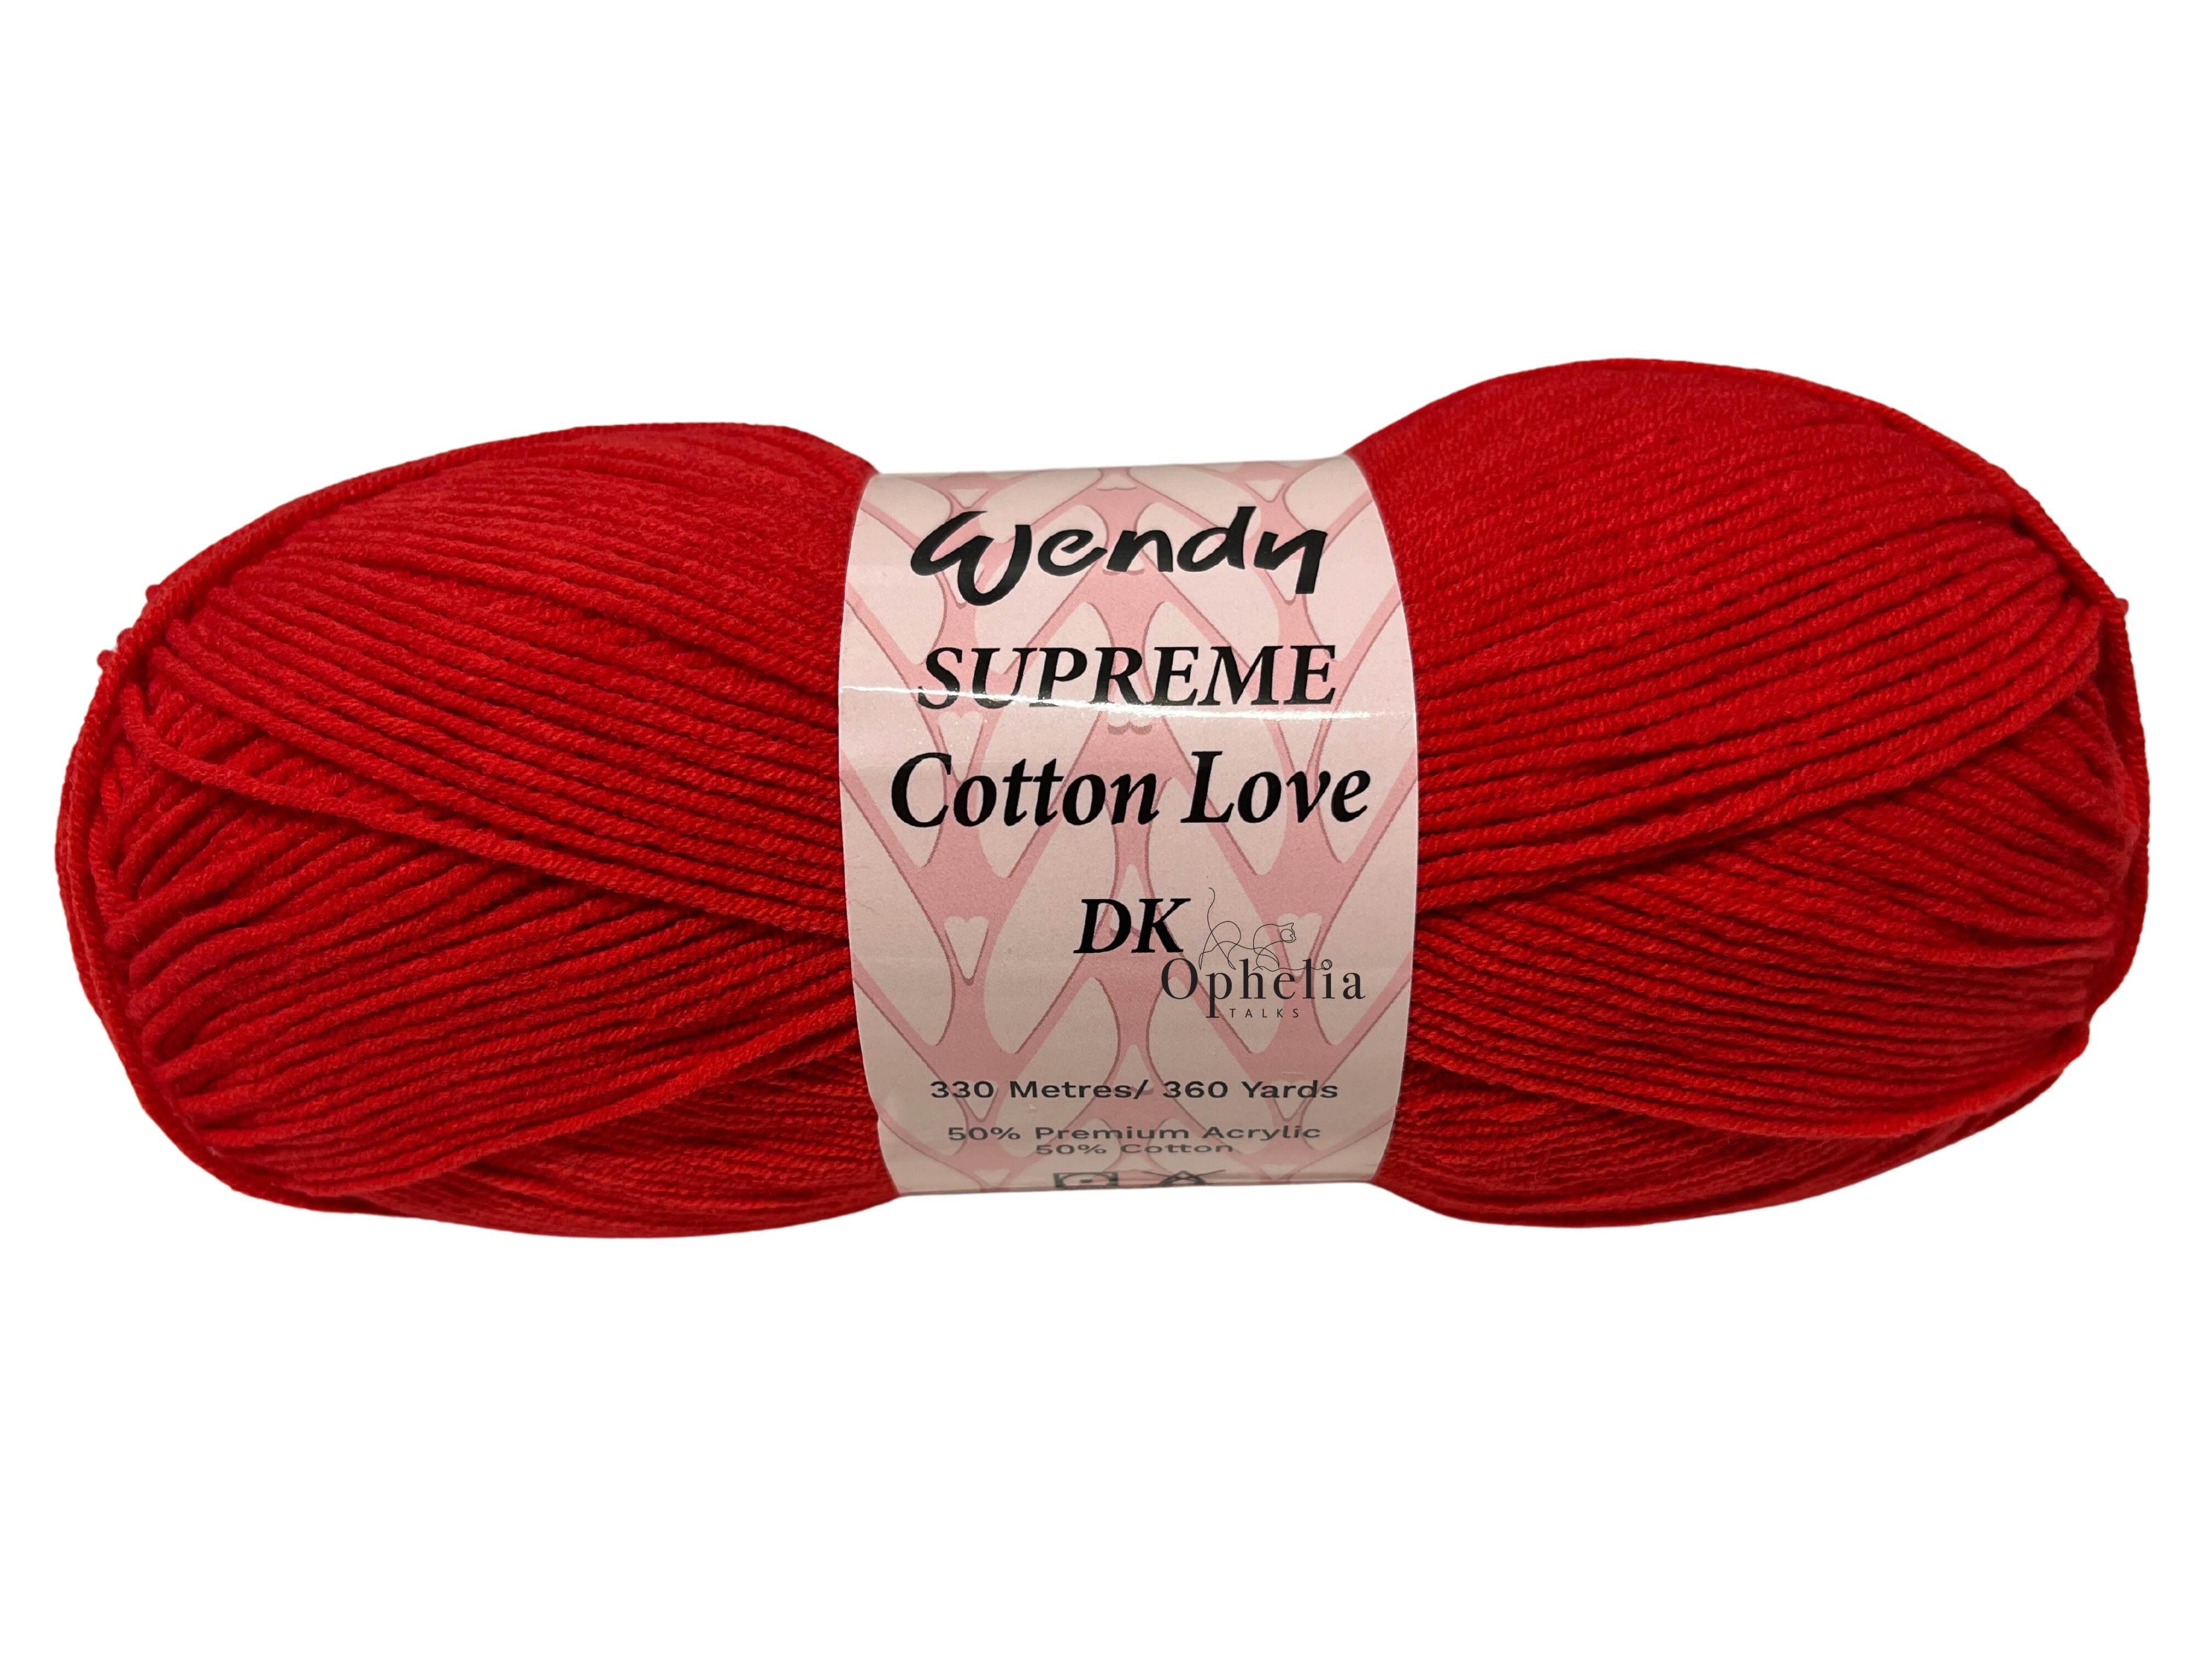 Wendy supreme cotton love in the colour Red WCT15